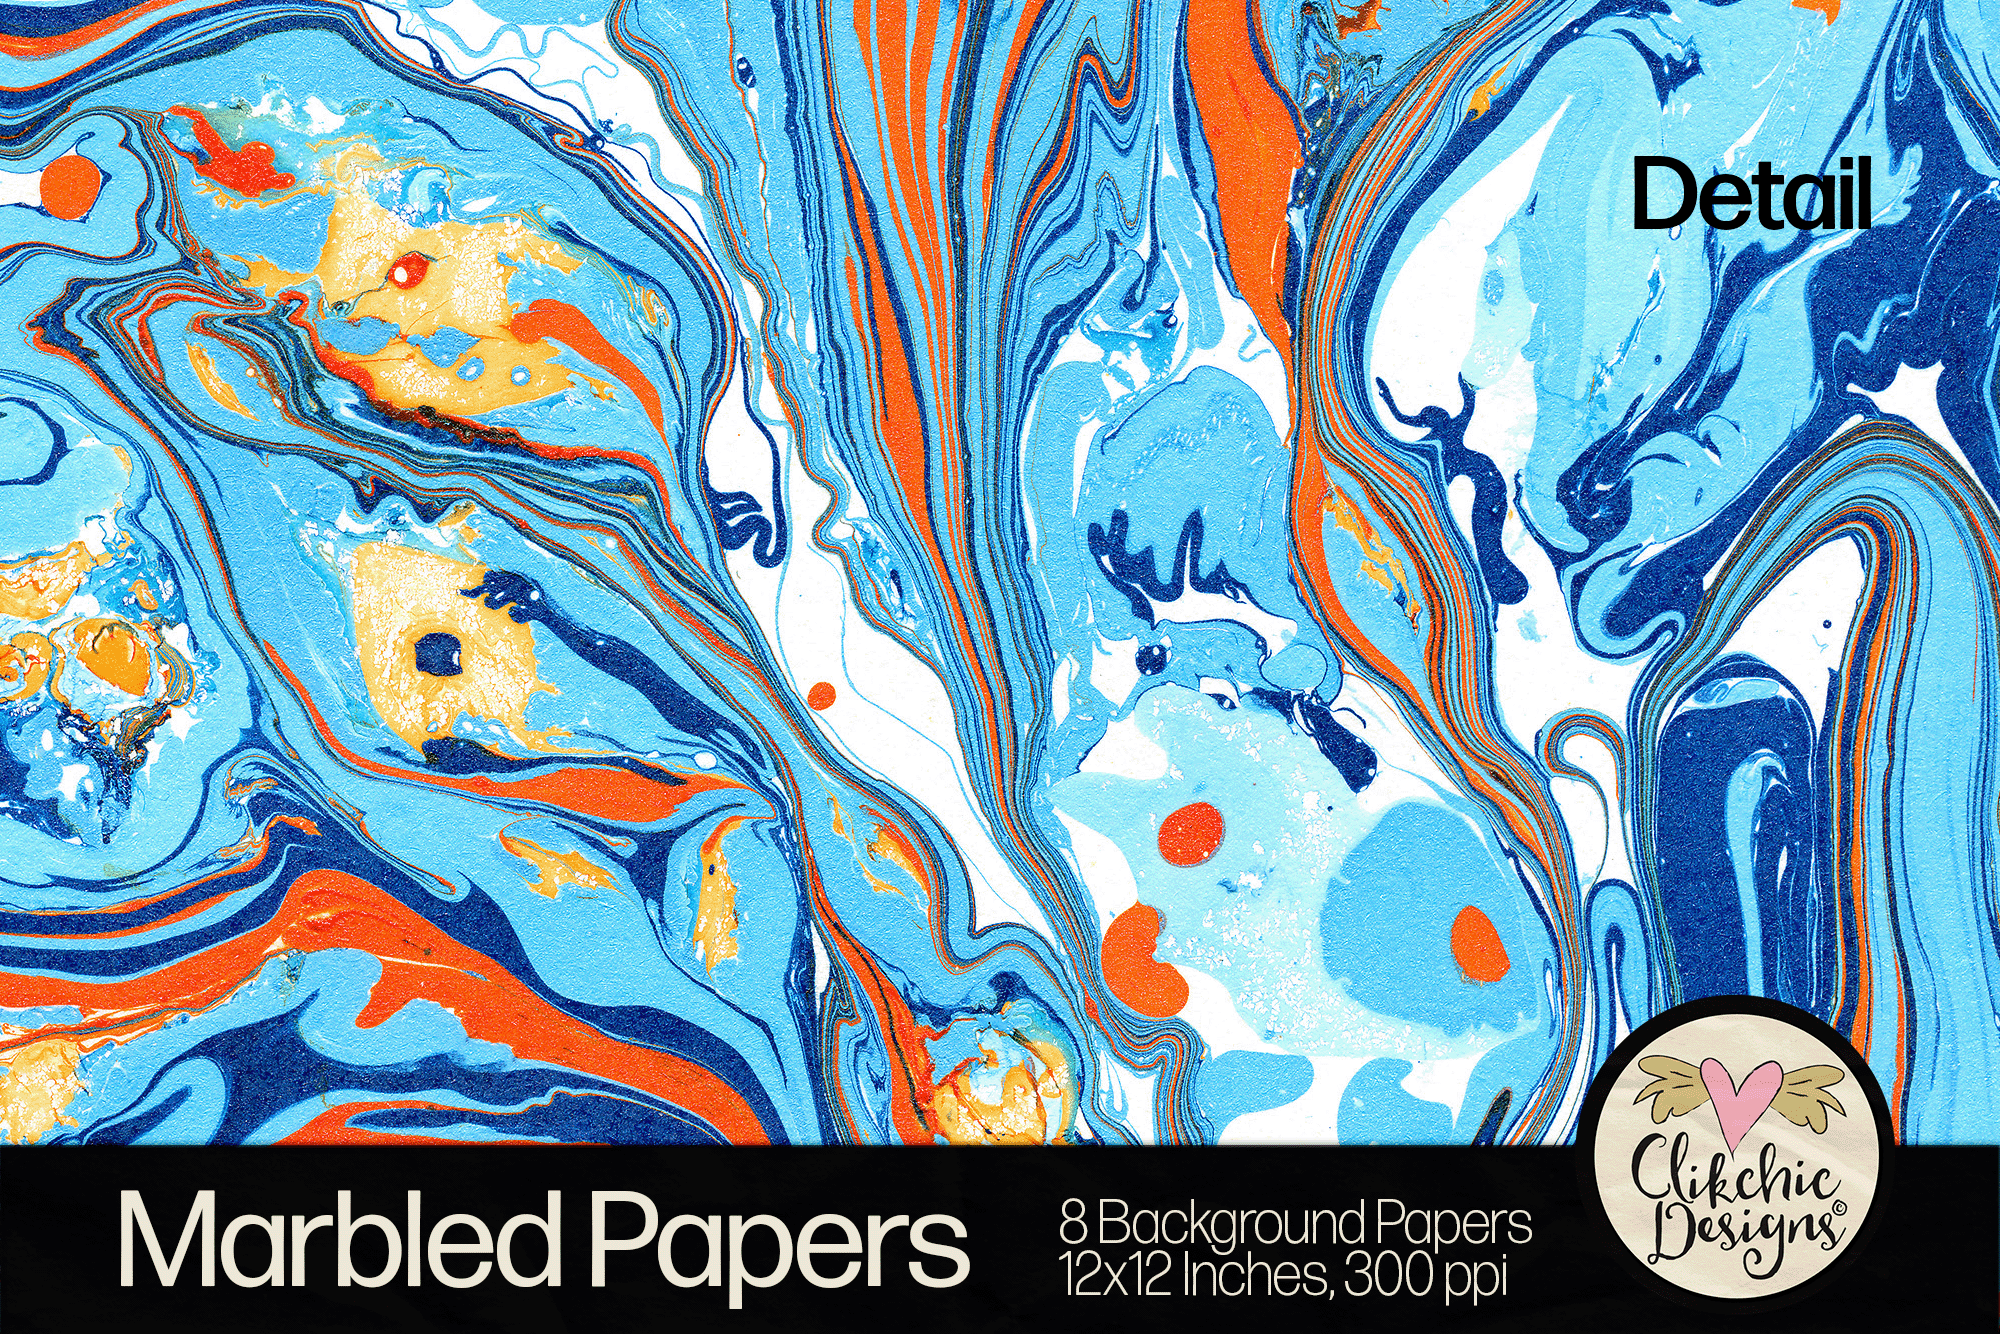 Marbled Background Papers by Clikchic Designs